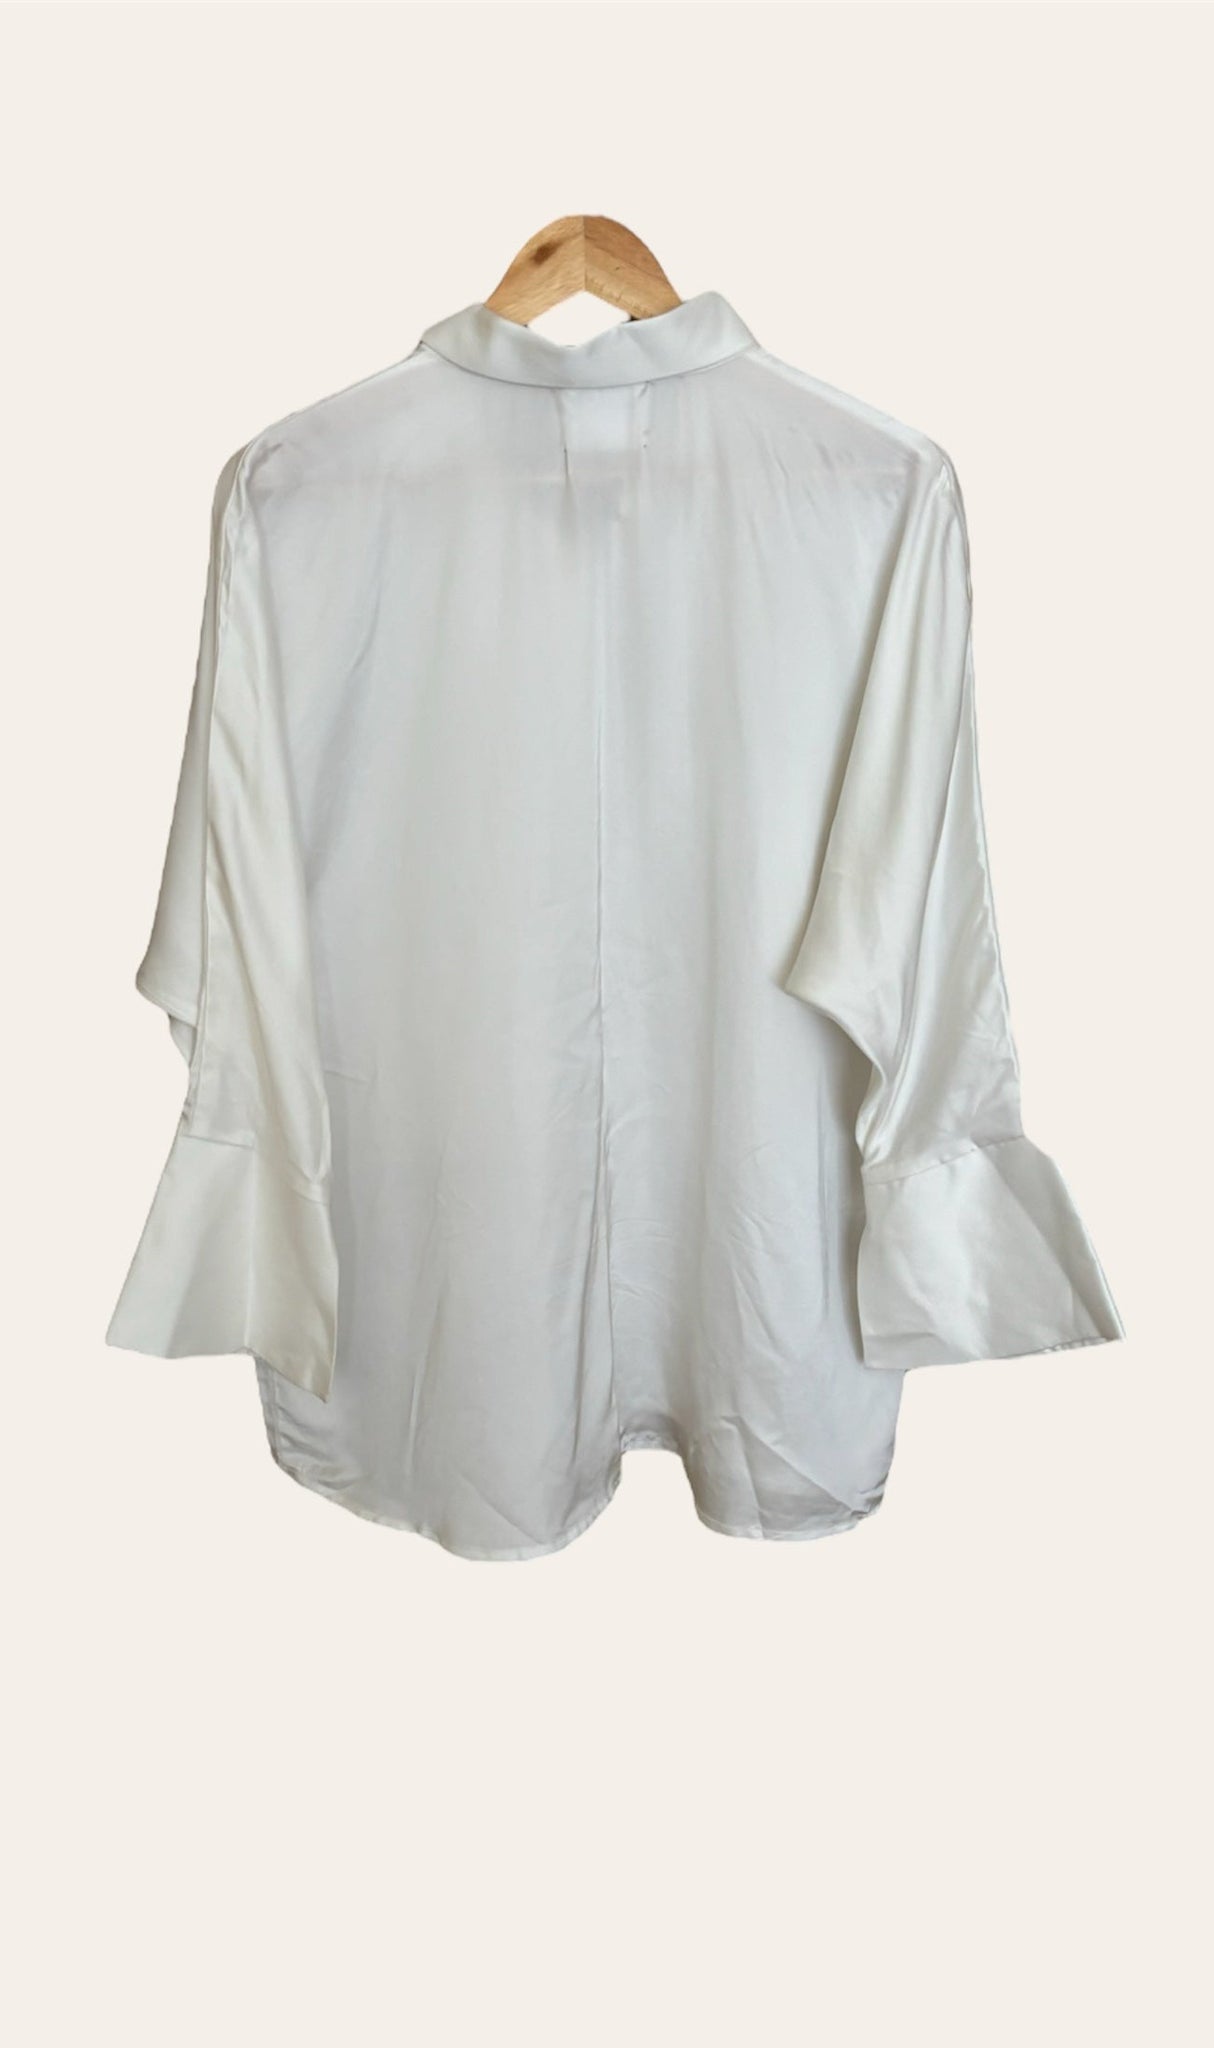 Lea One Size Shirt In Ivory/white